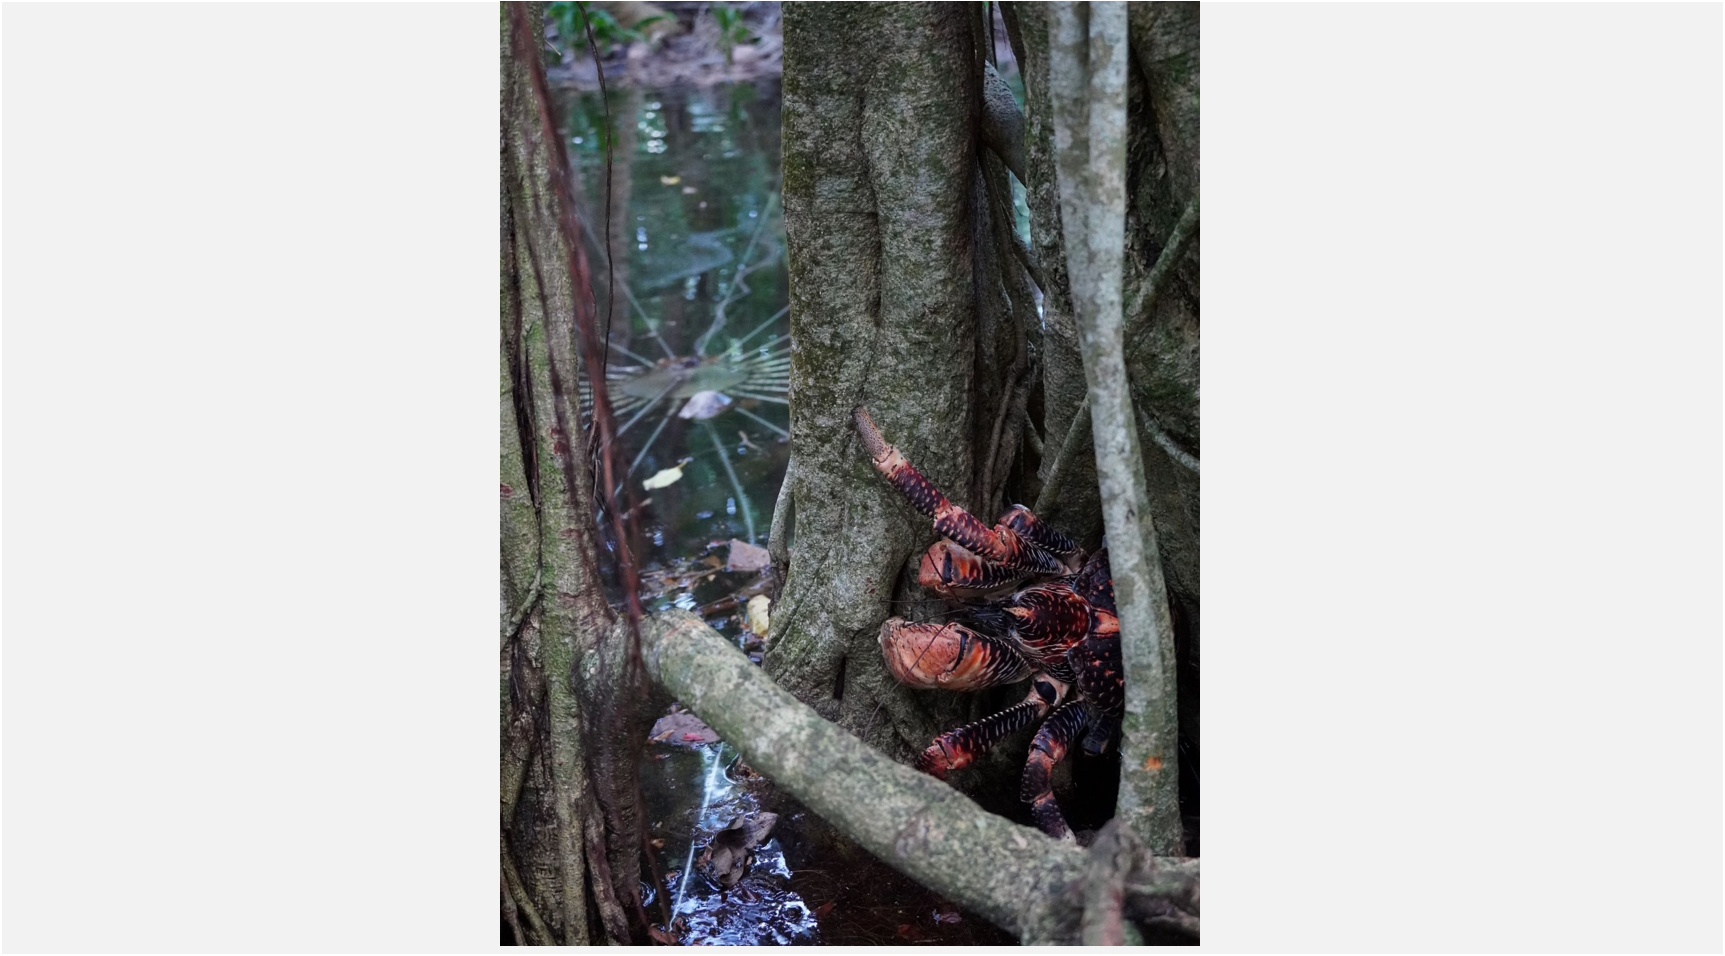 A local resident at H6 (the mighty coconut crab - Birgus latro) retreats from the water. 